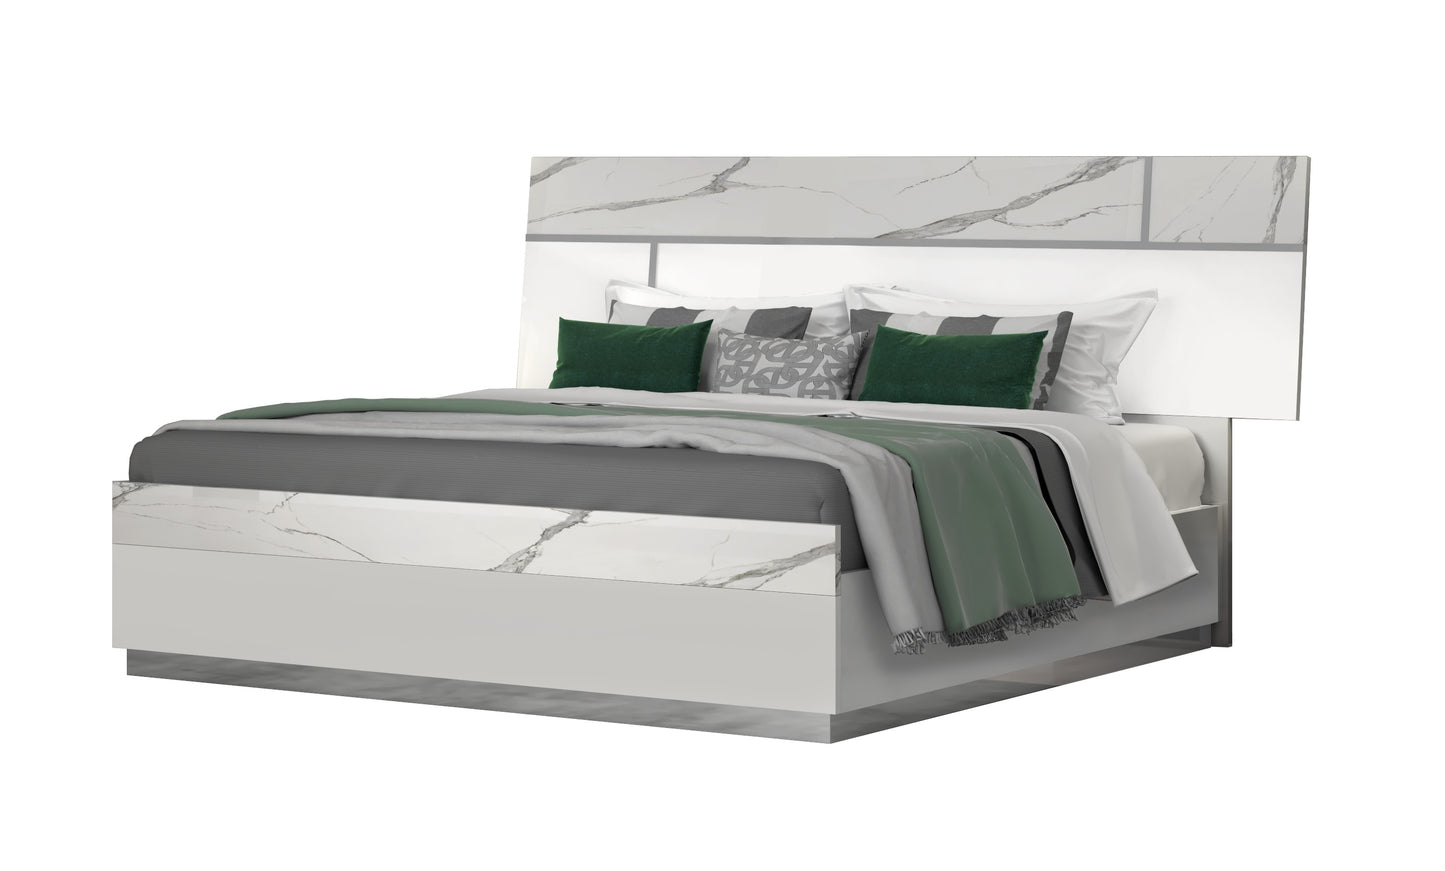 Sunset King Bed Bianco Luc Stat by JM